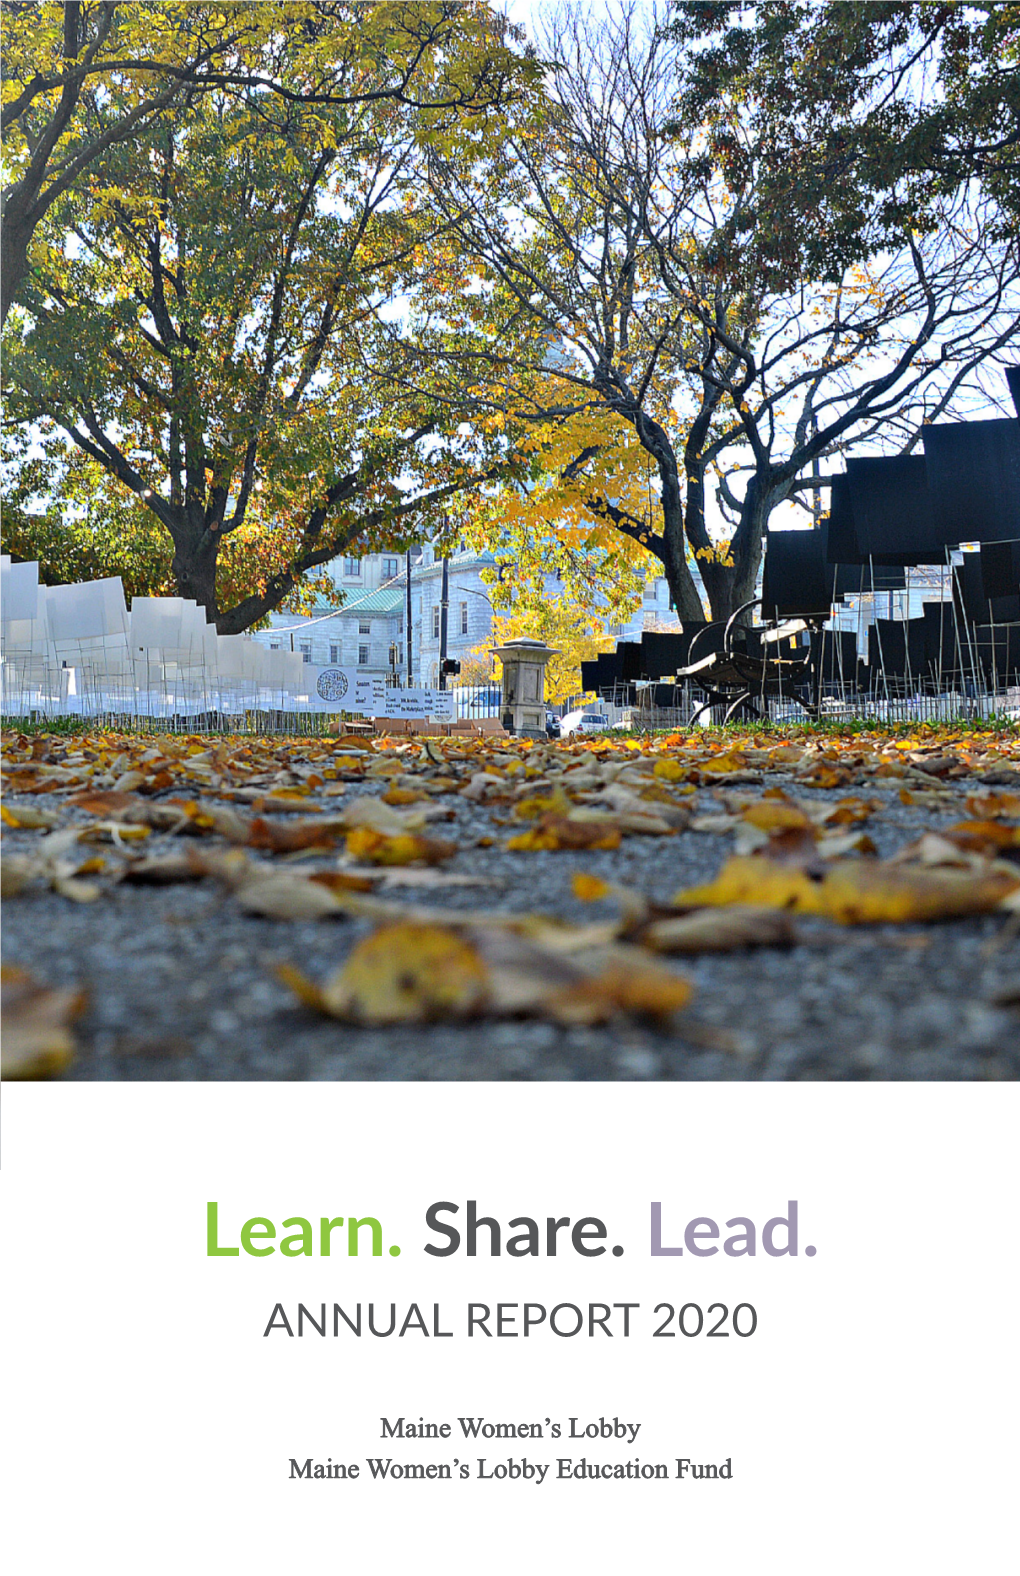 Learn. Share. Lead. ANNUAL REPORT 2020